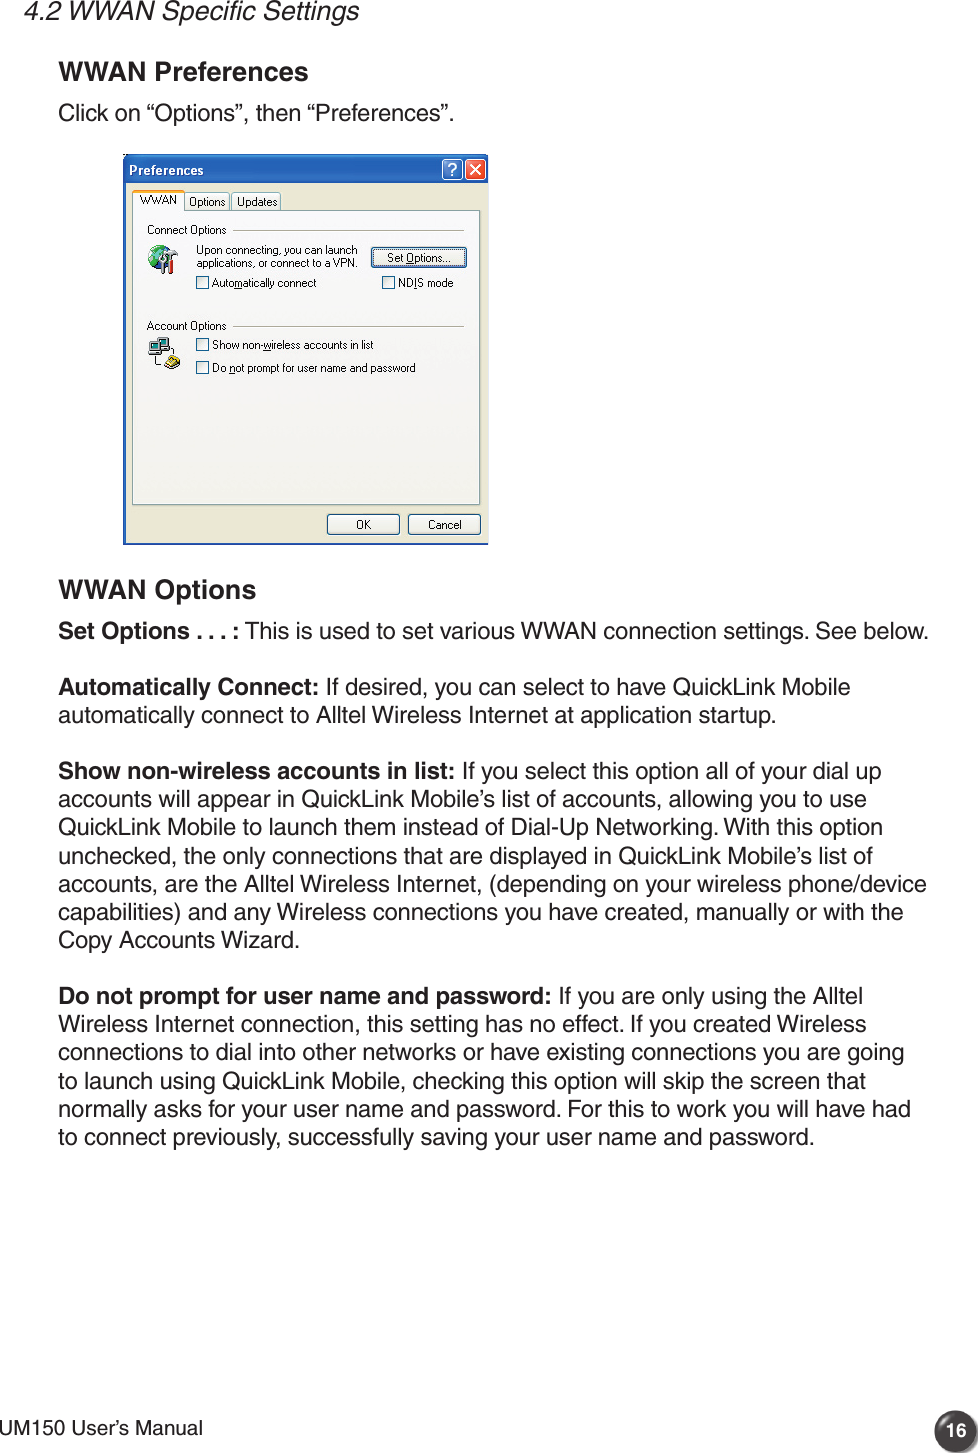 UM150 User’s Manual 16UM150 User’s Manual4.2 WWAN Specific SettingsWWAN PreferencesClick on “Options”, then “Preferences”. WWAN OptionsSet Options . . . : This is used to set various WWAN connection settings. See below.Automatically Connect: If desired, you can select to have QuickLink Mobile automatically connect to Alltel Wireless Internet at application startup.Show non-wireless accounts in list: If you select this option all of your dial up accounts will appear in QuickLink Mobile’s list of accounts, allowing you to use QuickLink Mobile to launch them instead of Dial-Up Networking. With this option unchecked, the only connections that are displayed in QuickLink Mobile’s list of accounts, are the Alltel Wireless Internet, (depending on your wireless phone/device capabilities) and any Wireless connections you have created, manually or with the Copy Accounts Wizard.Do not prompt for user name and password: If you are only using the Alltel Wireless Internet connection, this setting has no effect. If you created Wireless connections to dial into other networks or have existing connections you are going to launch using QuickLink Mobile, checking this option will skip the screen that normally asks for your user name and password. For this to work you will have had to connect previously, successfully saving your user name and password.